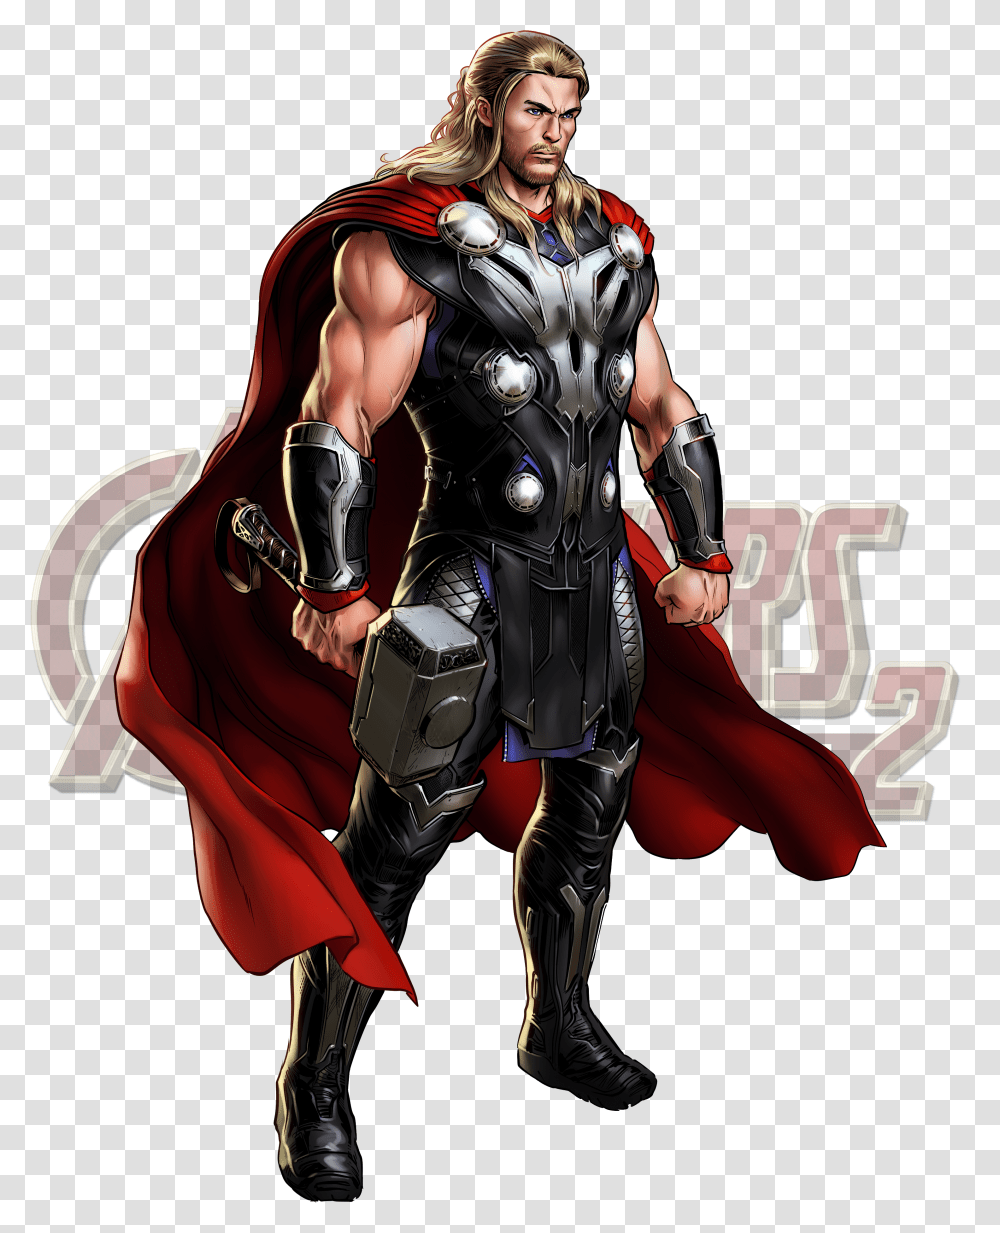 Avengers Alliance 2 Wikia Thor Marvel Ultimate Alliance Transparent Png